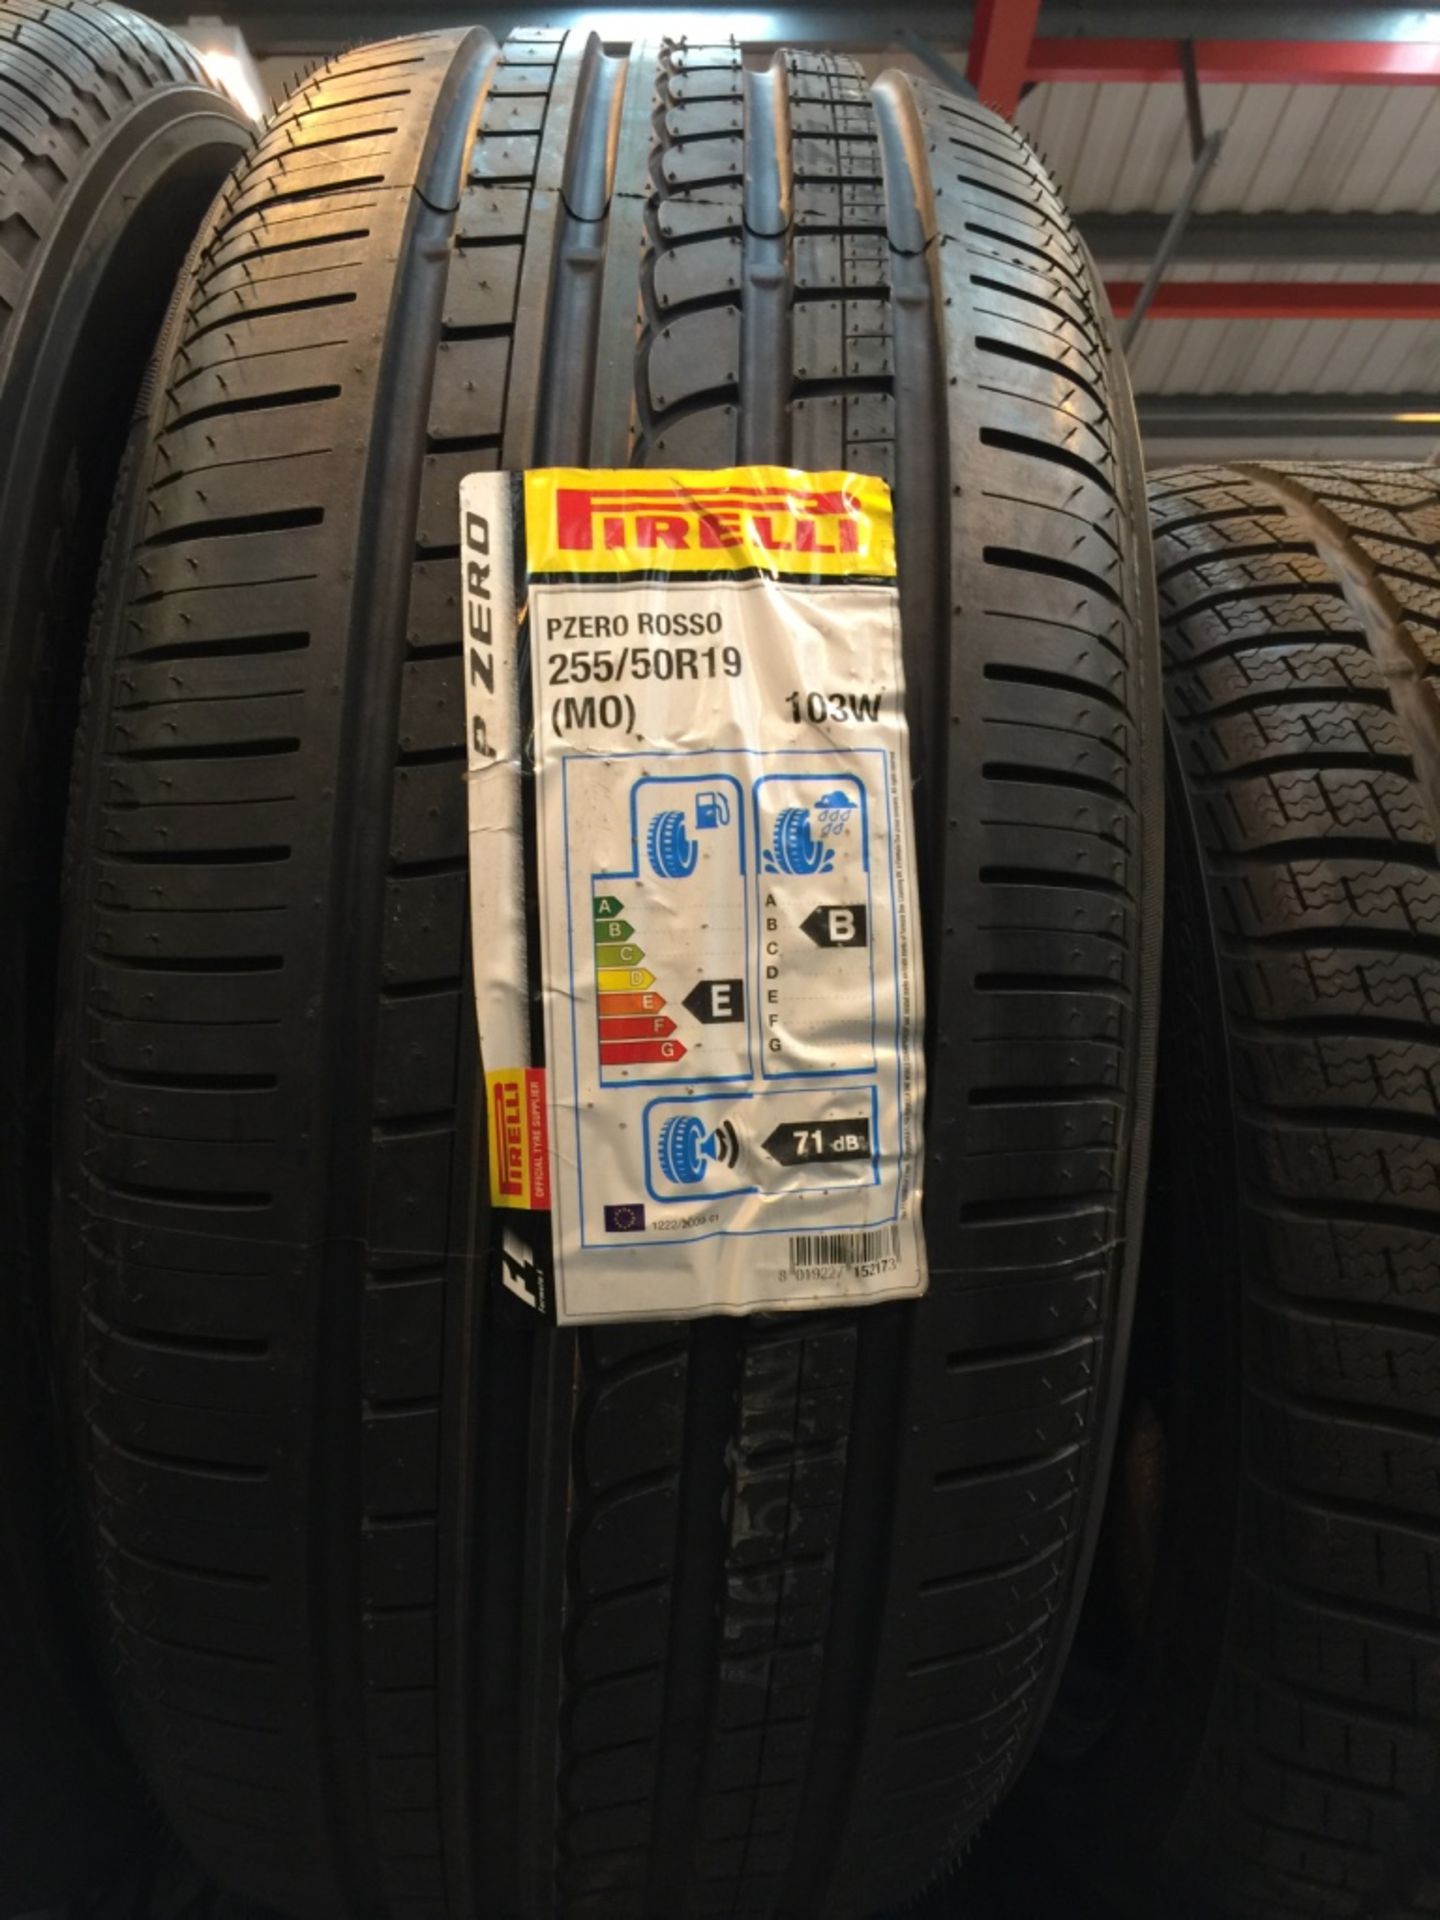 54: Pirelli Tyres Car & 4X4 - Many Large Sizes to include 18,19,21" Please see further Pictures ( - Image 21 of 55